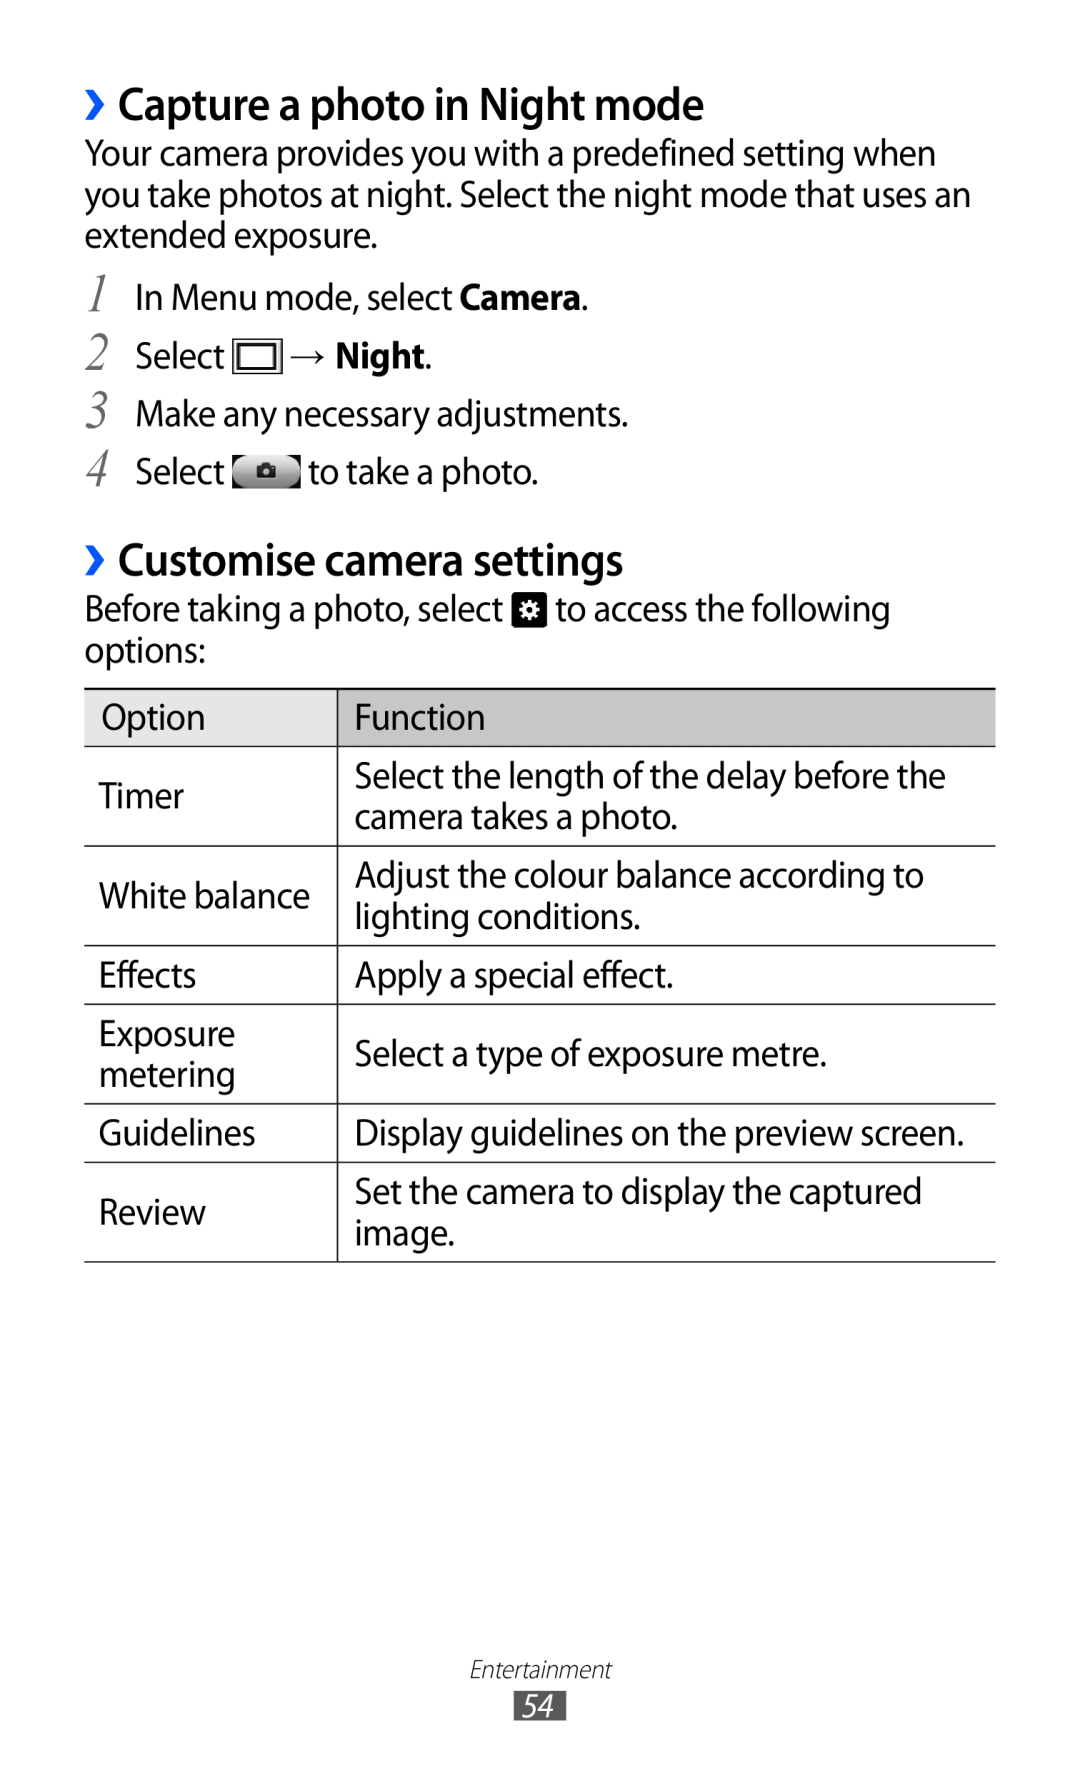 Samsung GT-S5380SSAXEZ, GT-S5380SSADBT, GT-S5380WRGDBT manual ››Capture a photo in Night mode, ››Customise camera settings 